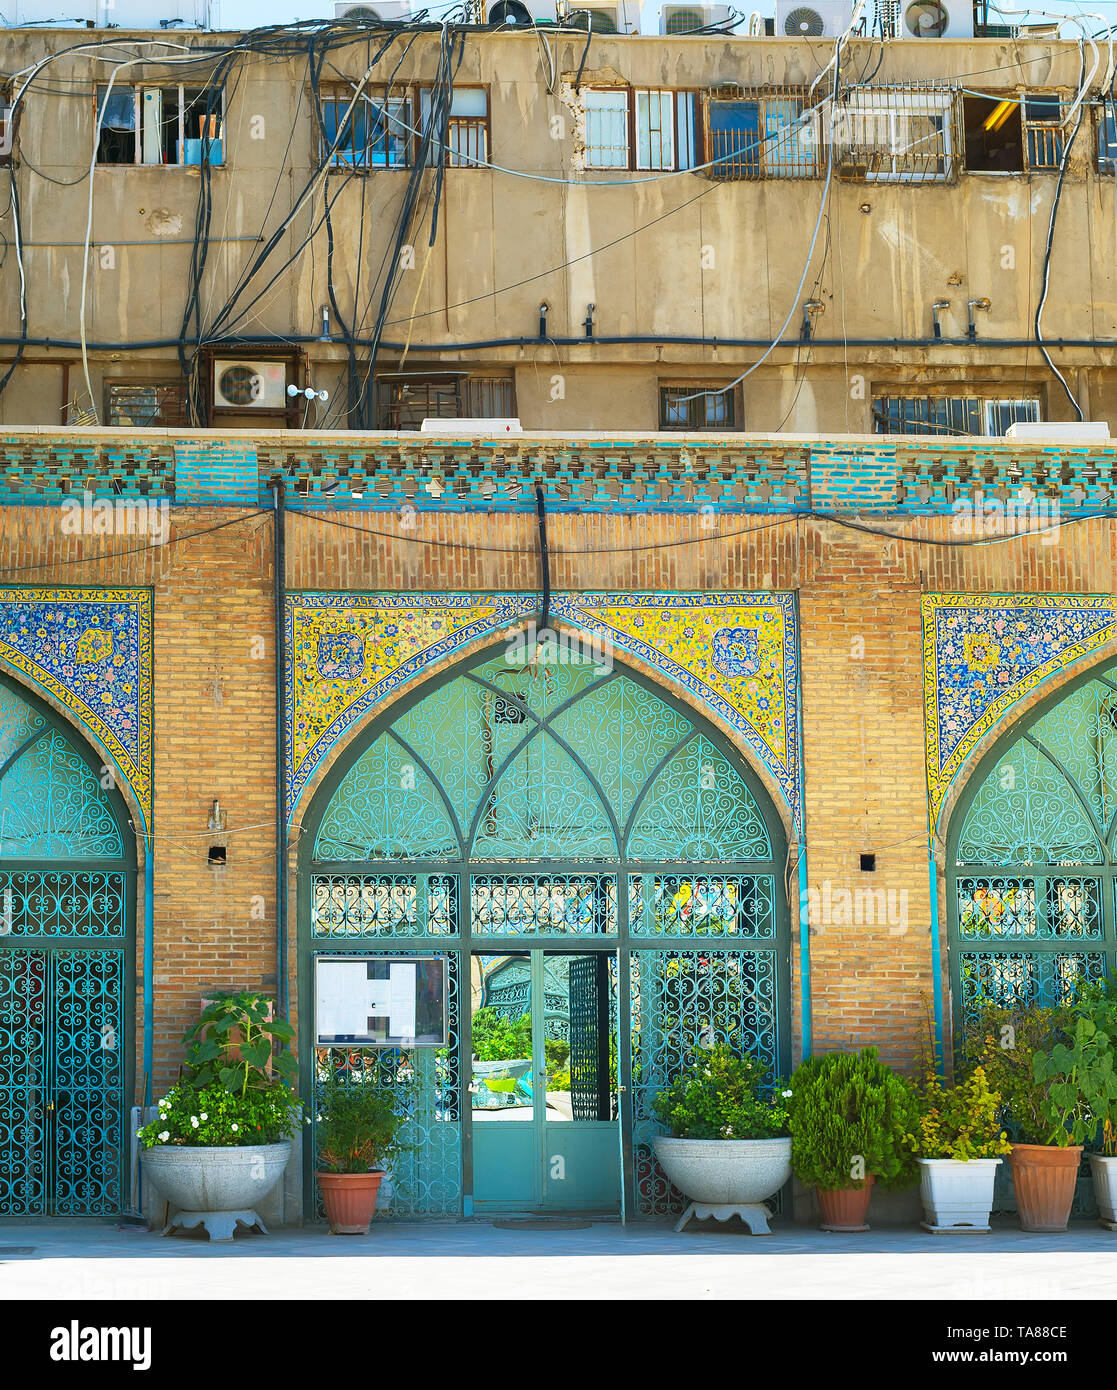 Contrast of modern building exterior with air conditions and traditional mosaic facade, Tehran Grand Bazaar, Iran Stock Photo